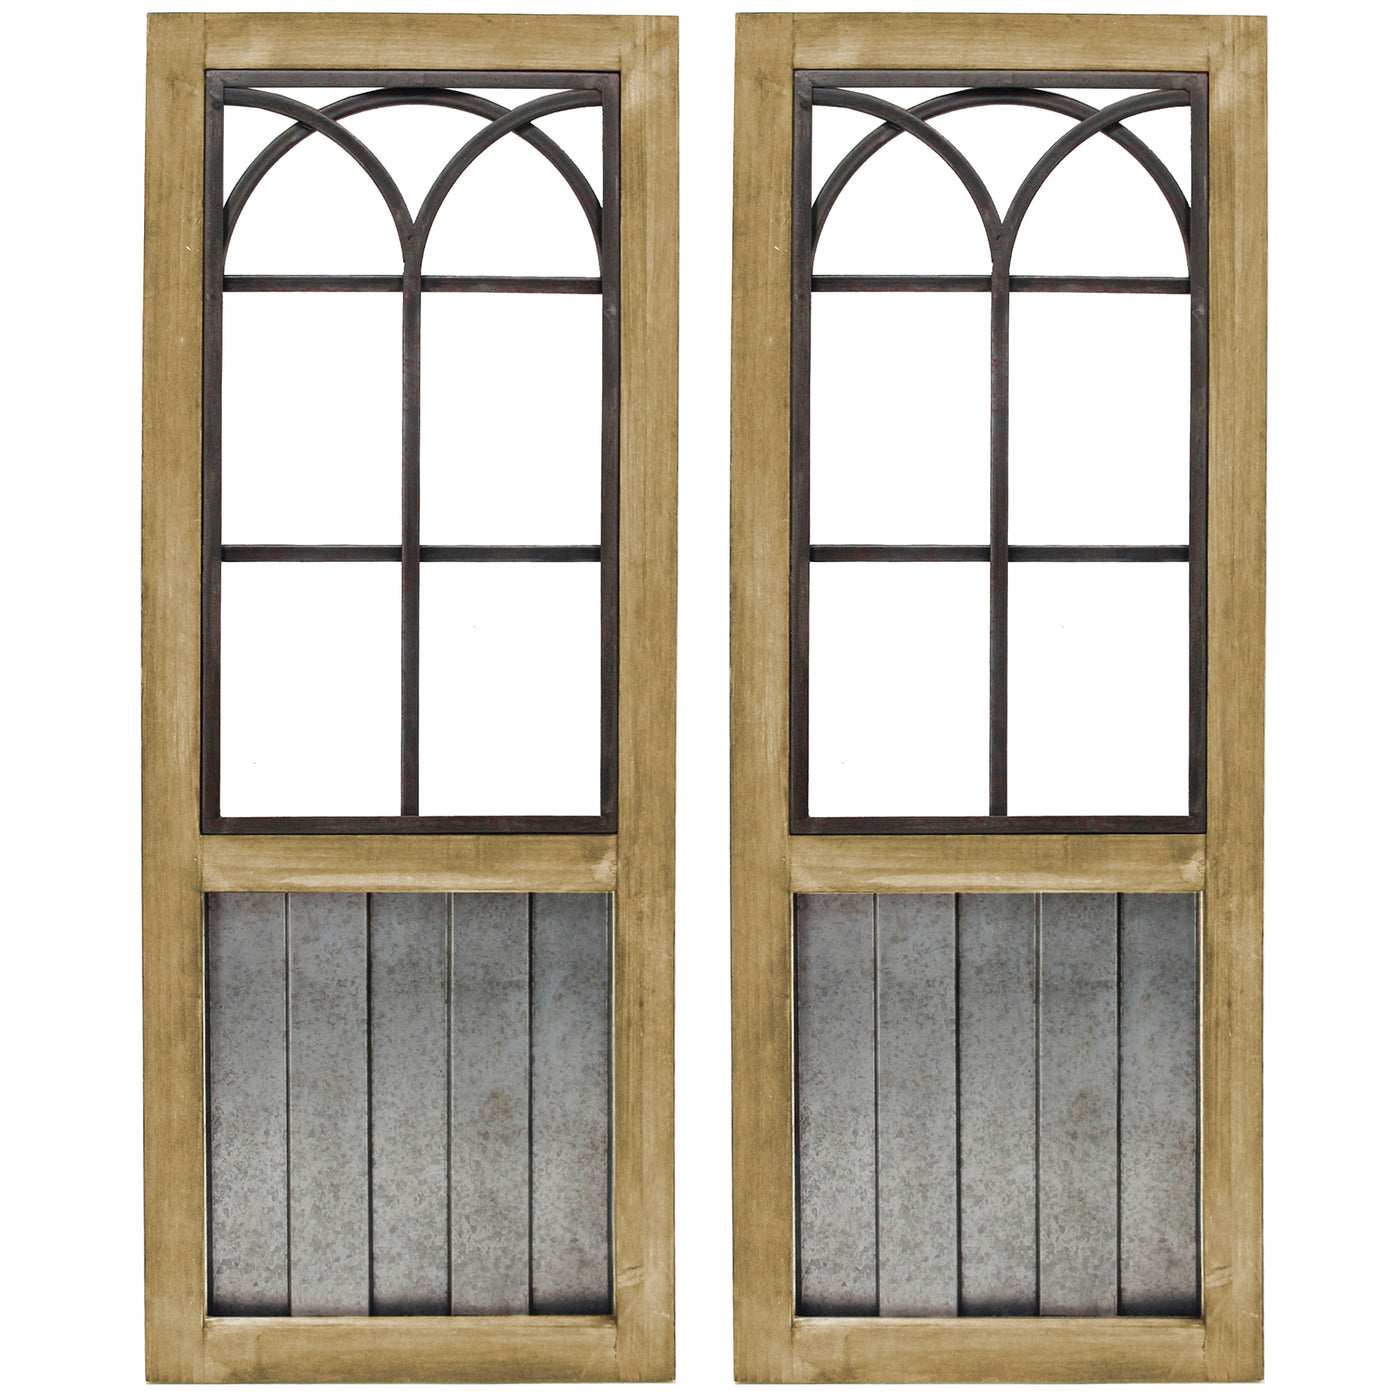 FirsTime & Co. Brown Willow Farms Wall Décor 2-Piece Set, Farmhouse, Metal, 12 x 1 x 31.5 inches